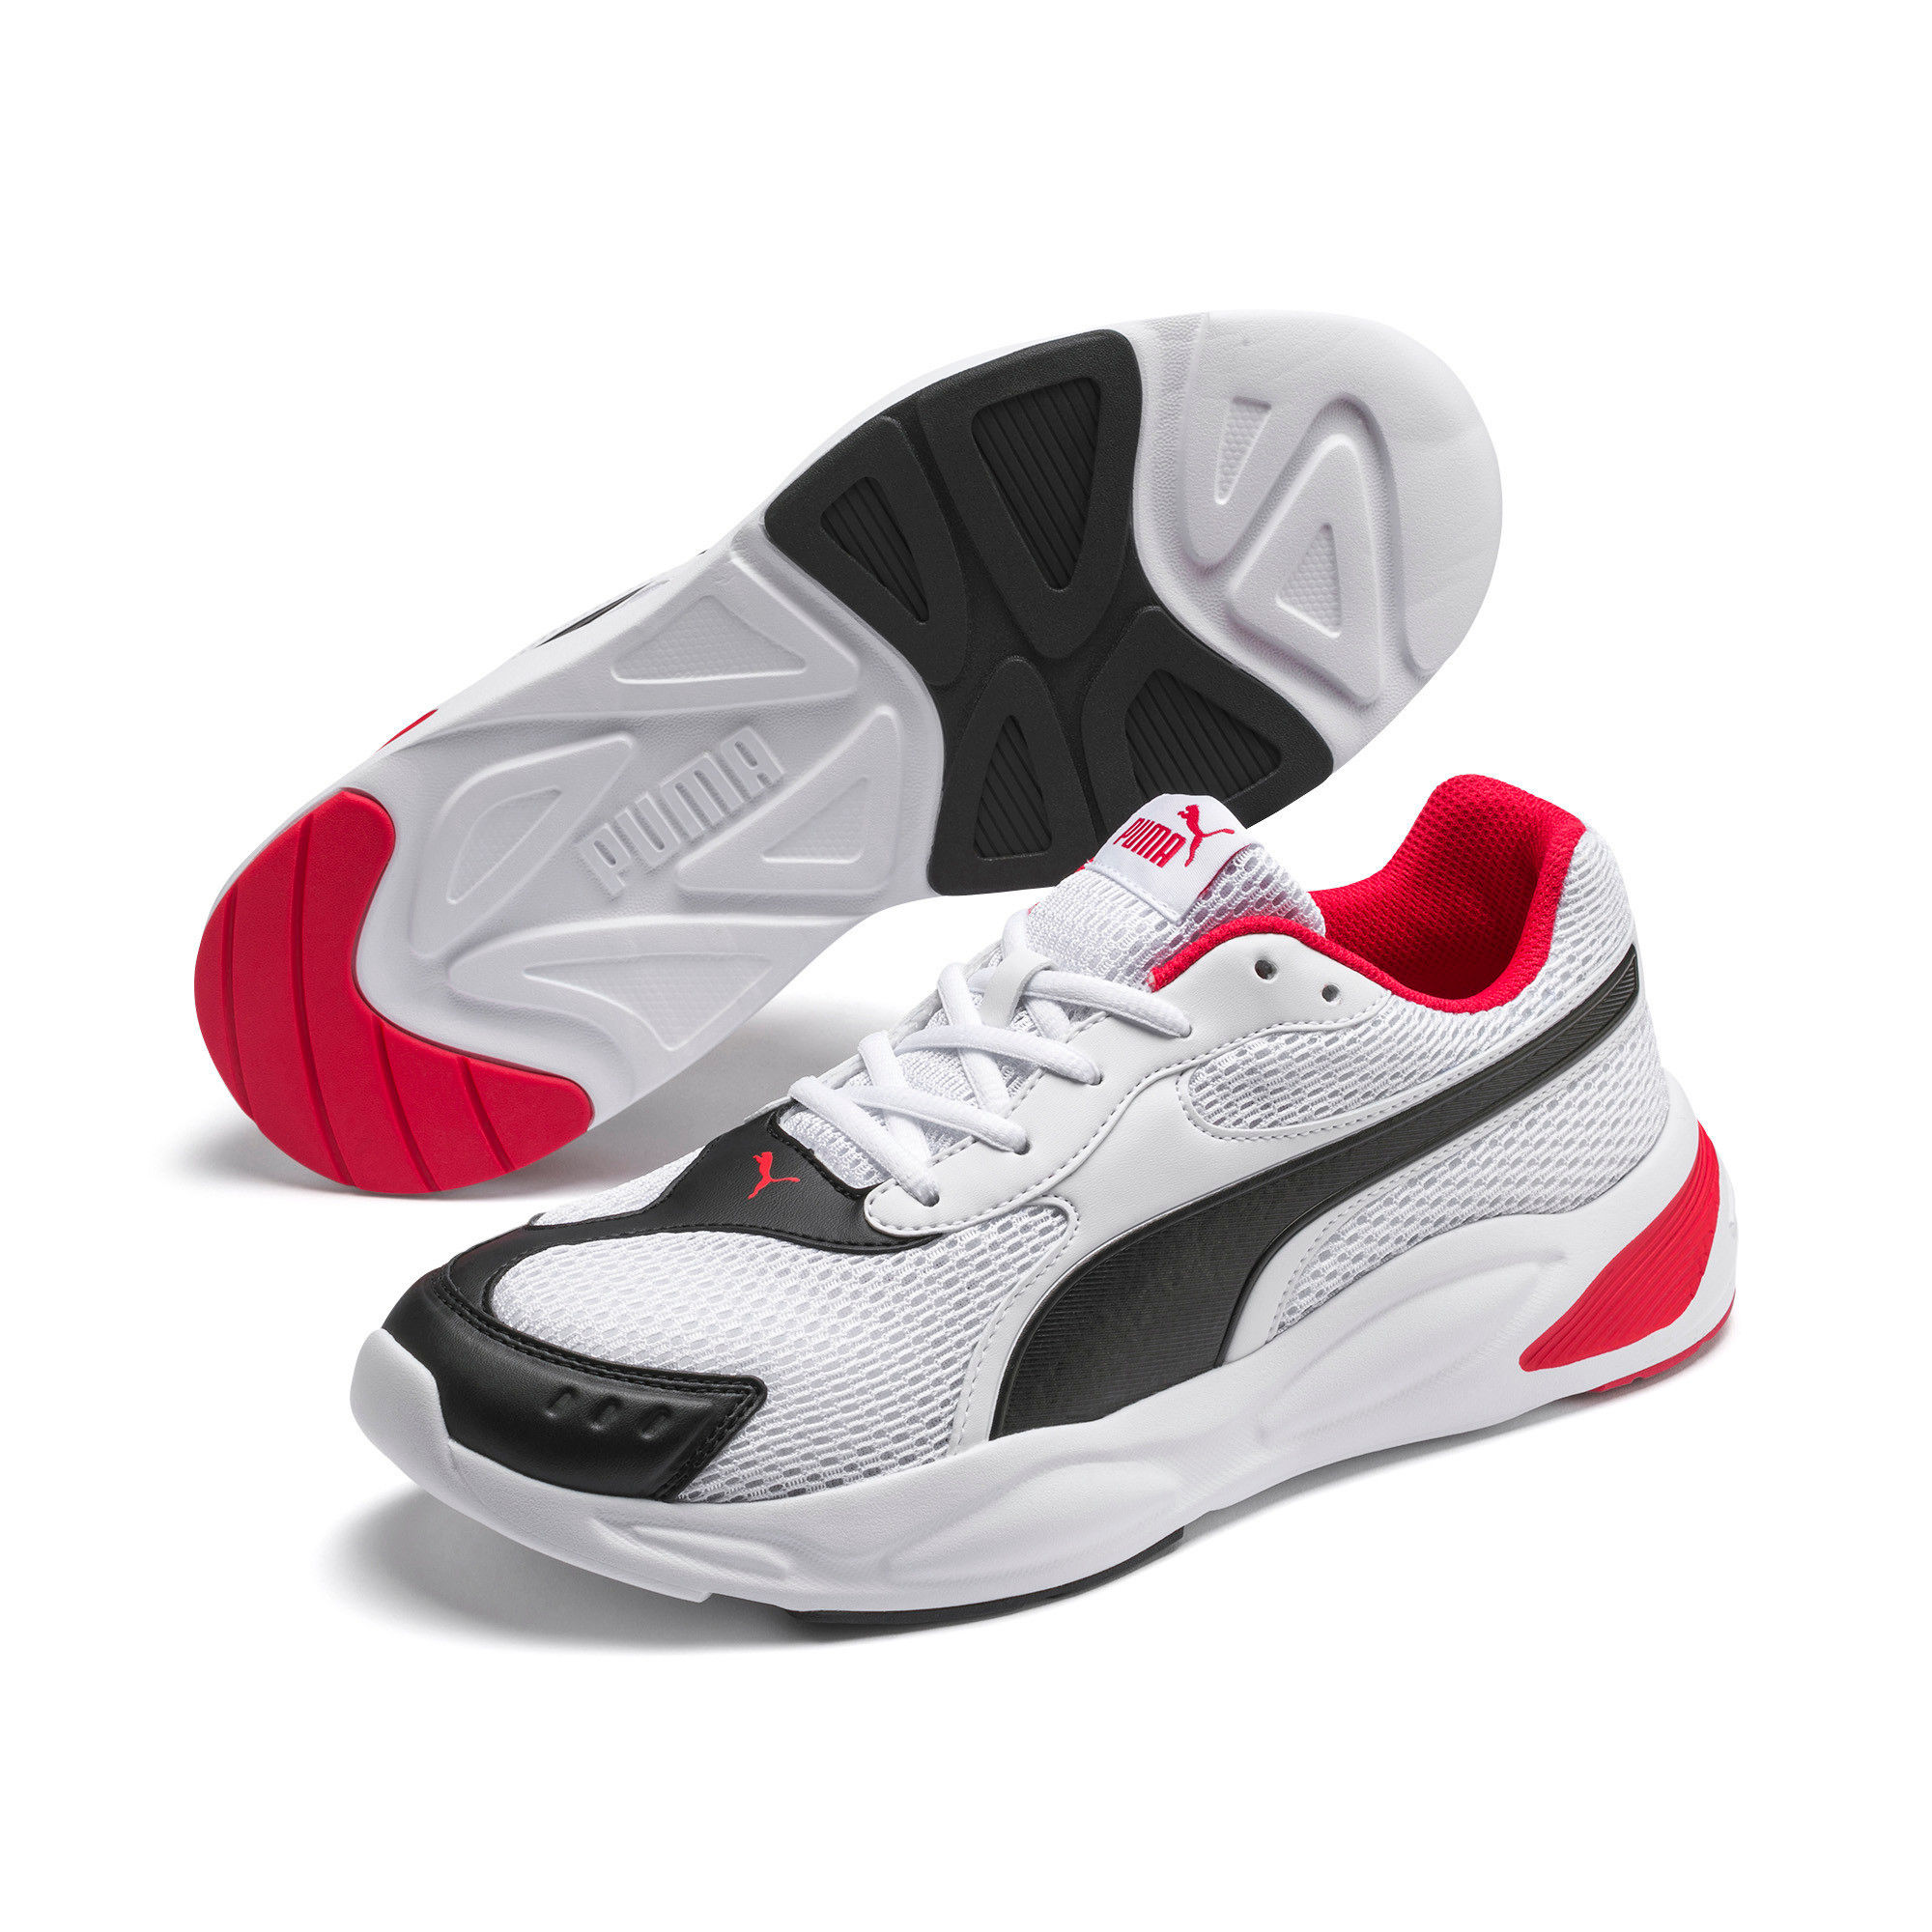 puma shoes from the 90's